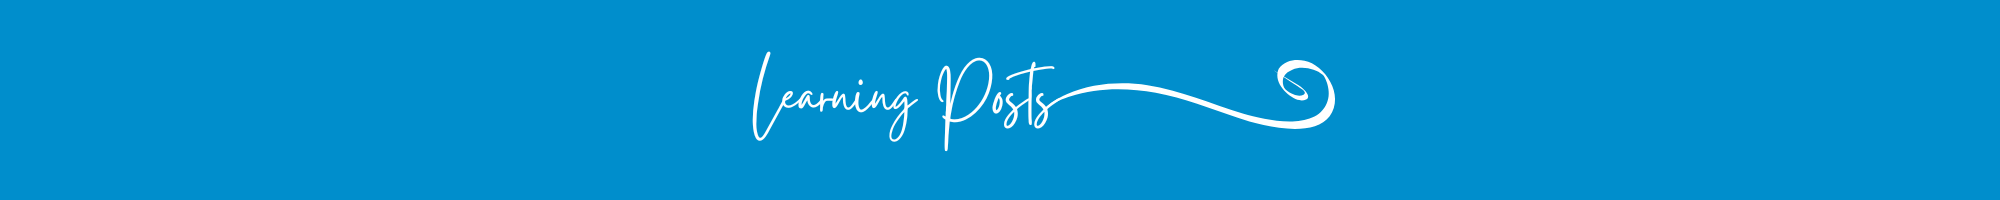 Header Image with blue background and the words learning posts in white lettering